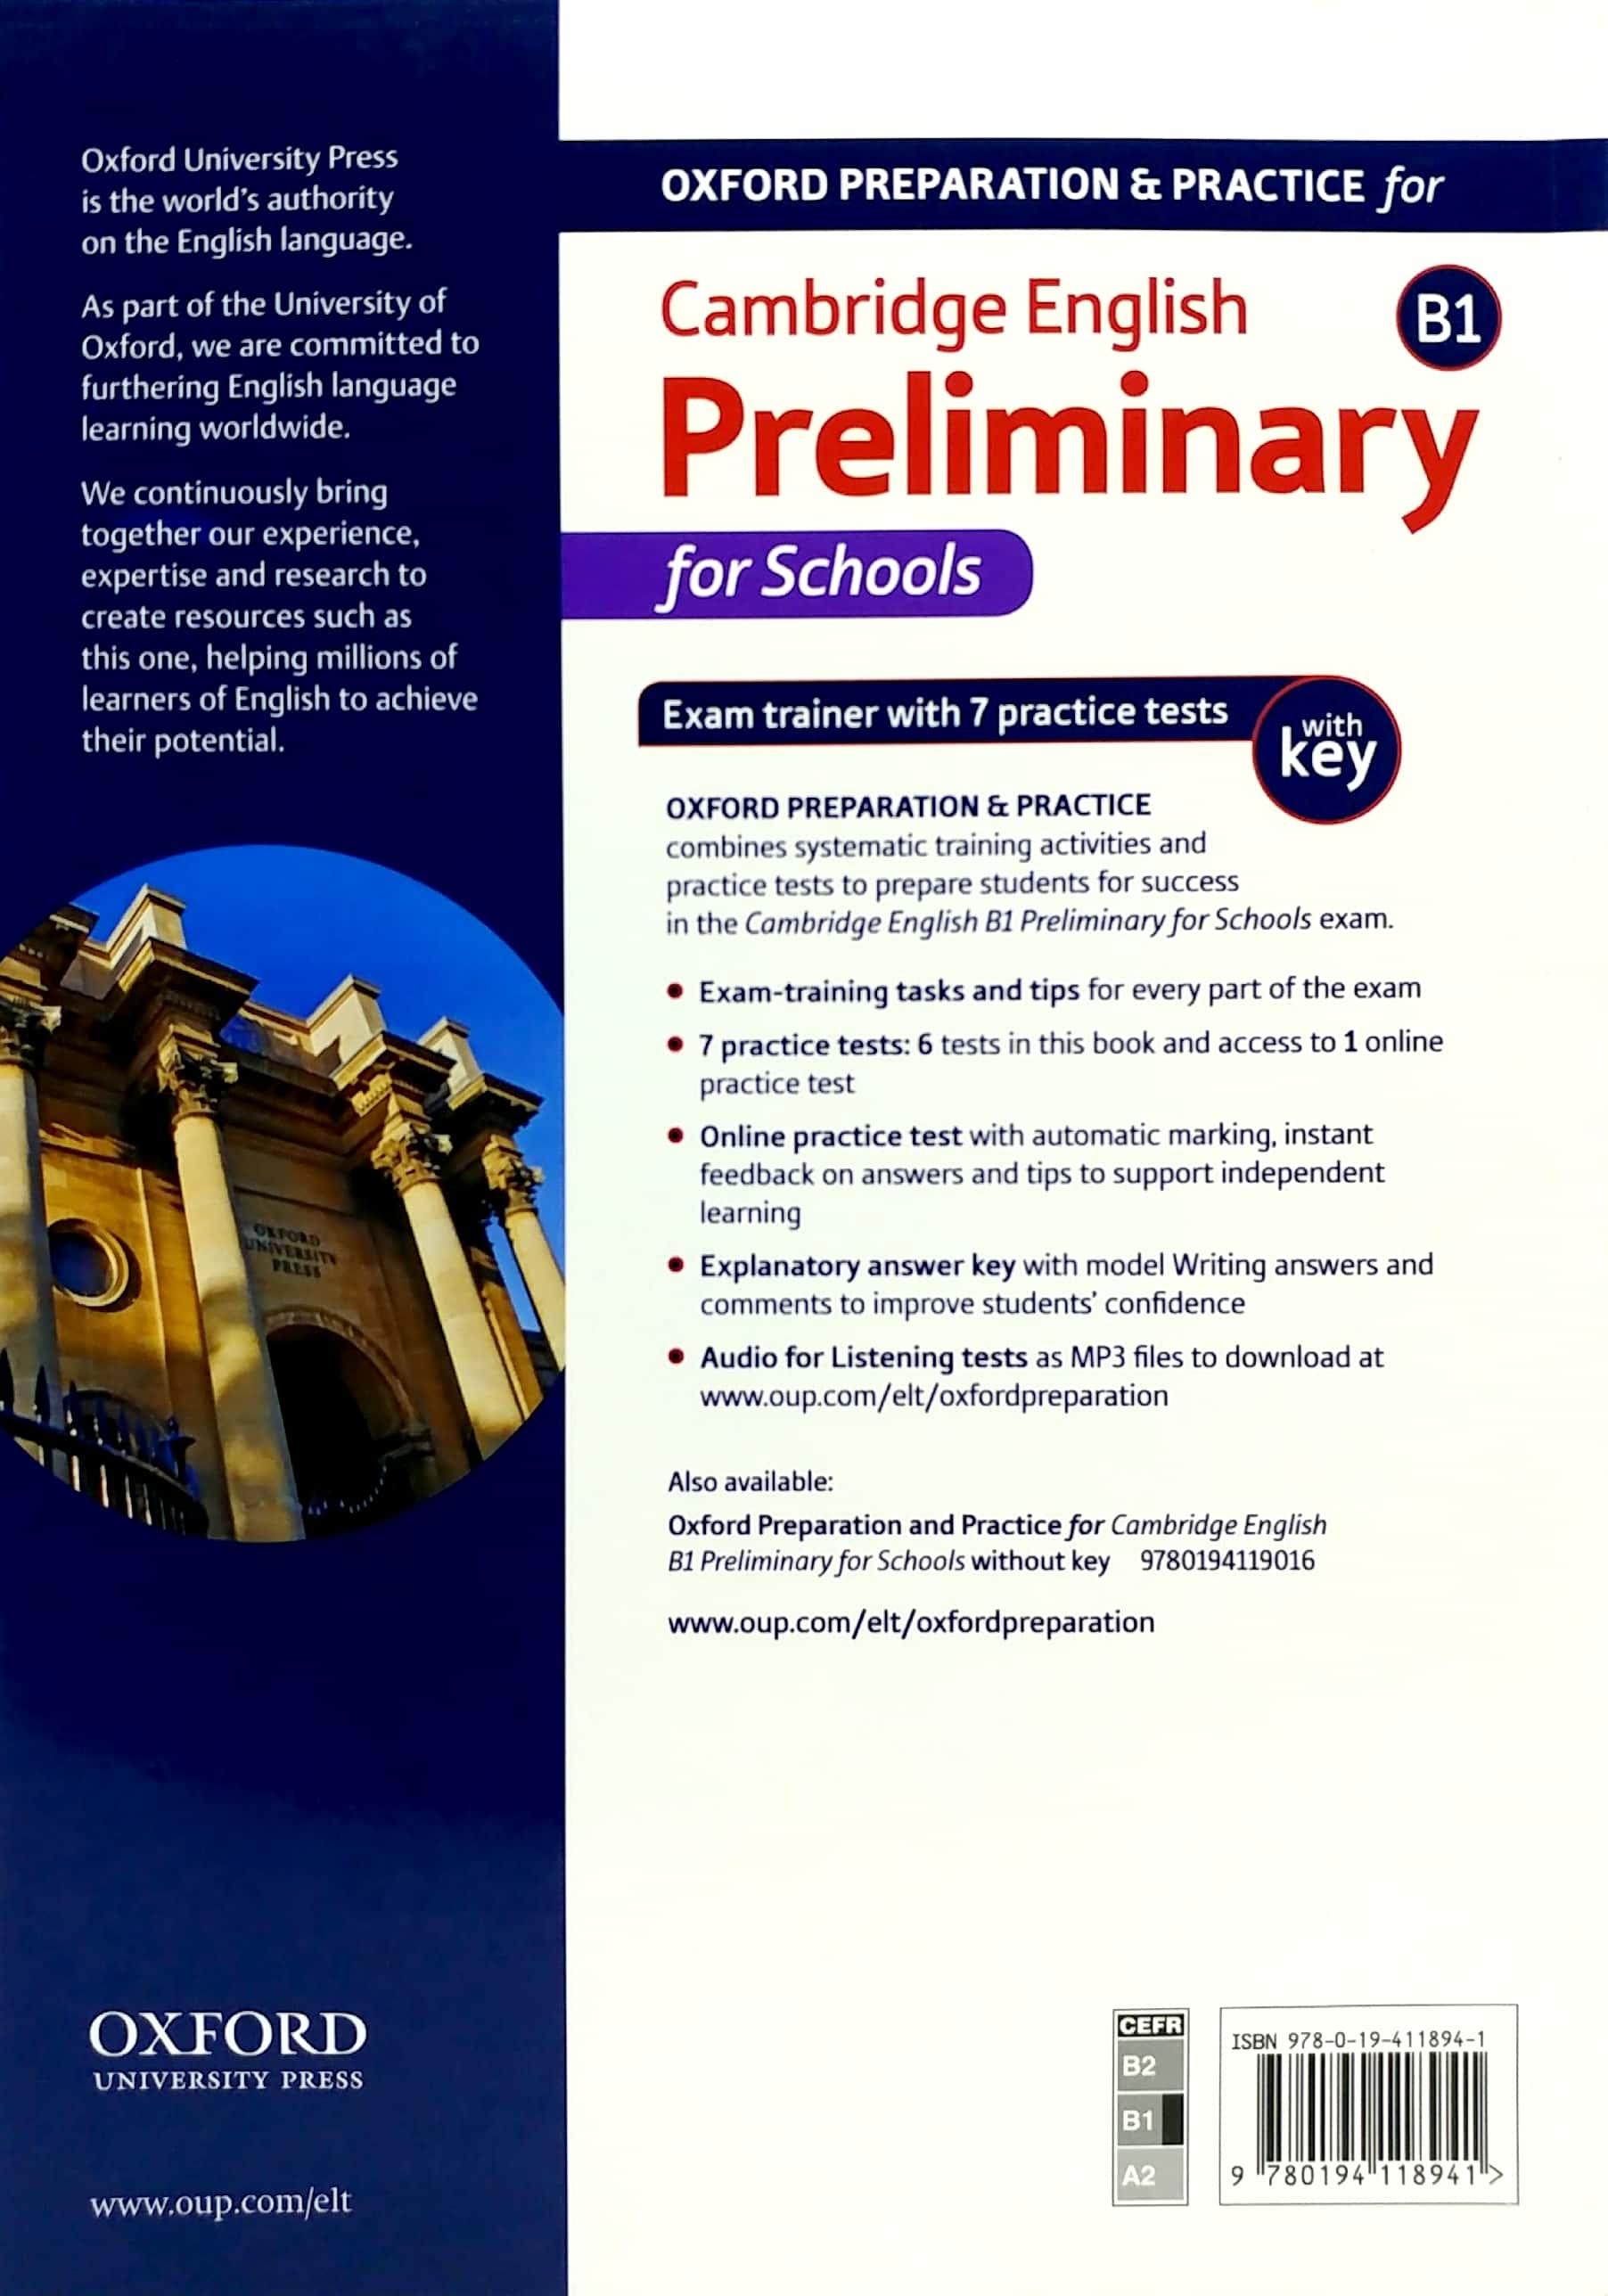 Hình ảnh Oxford Preparation And Practice For Cambridge English B1 Preliminary For Schools Exam Trainer With Key